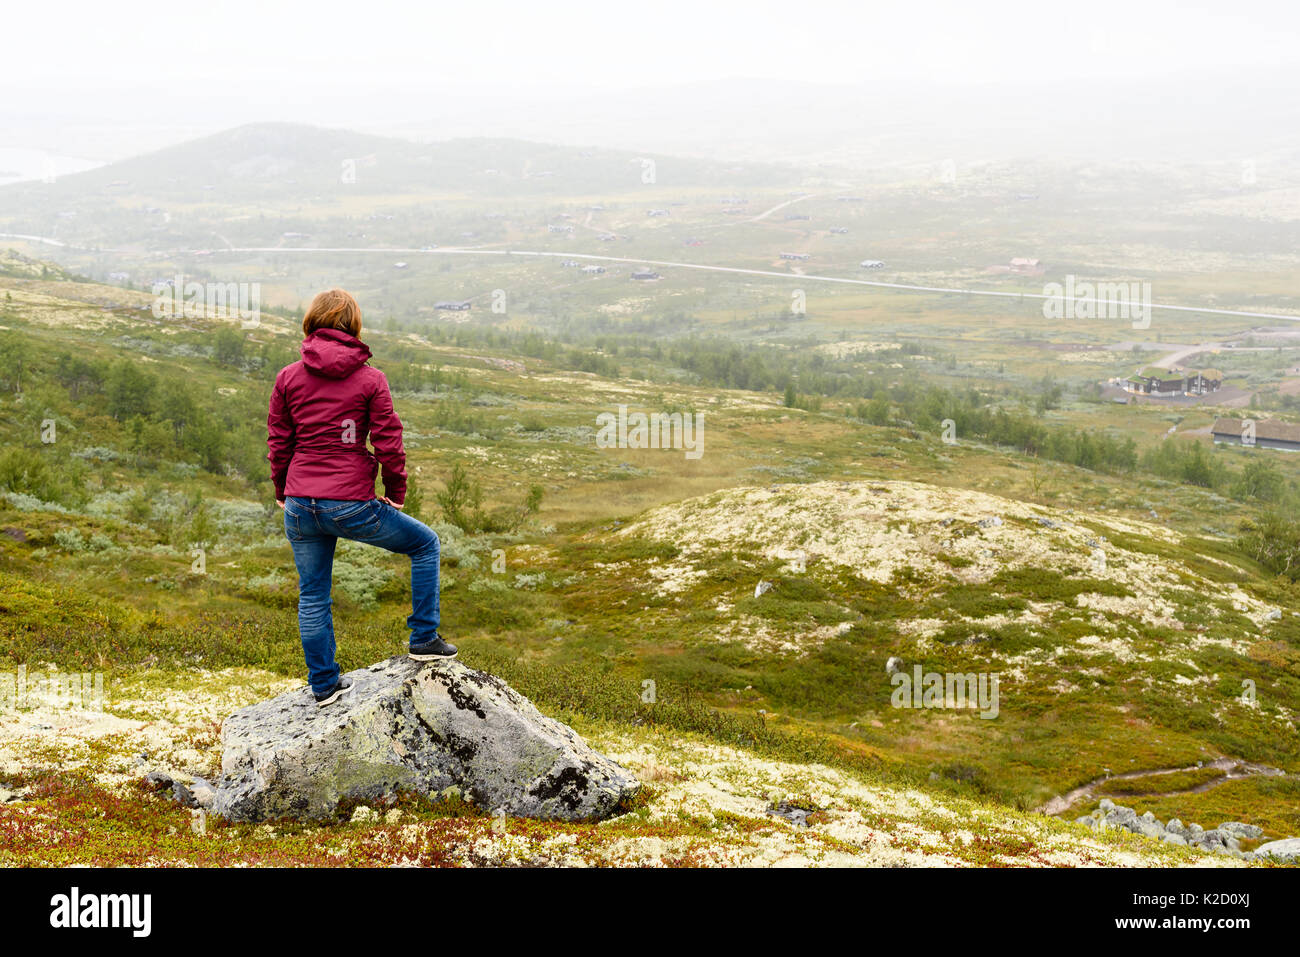 Young adult person looking out over foggy mountain view with small village and road. Location Vasstulan, Norway. Stock Photo